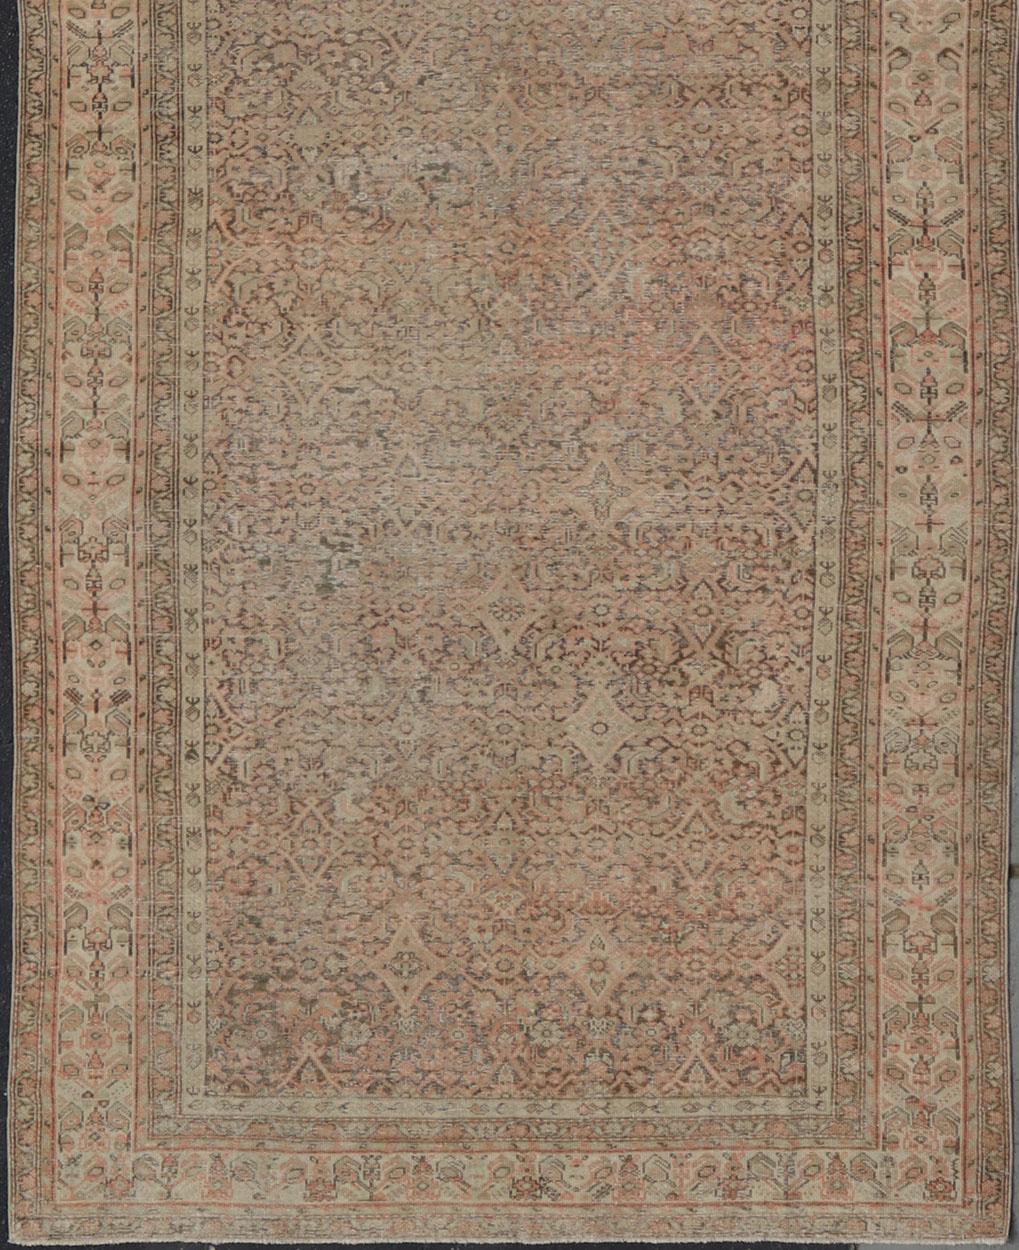 Antique Malayer Persian Gallery with All Over Design within Multi-Tier Border For Sale 2